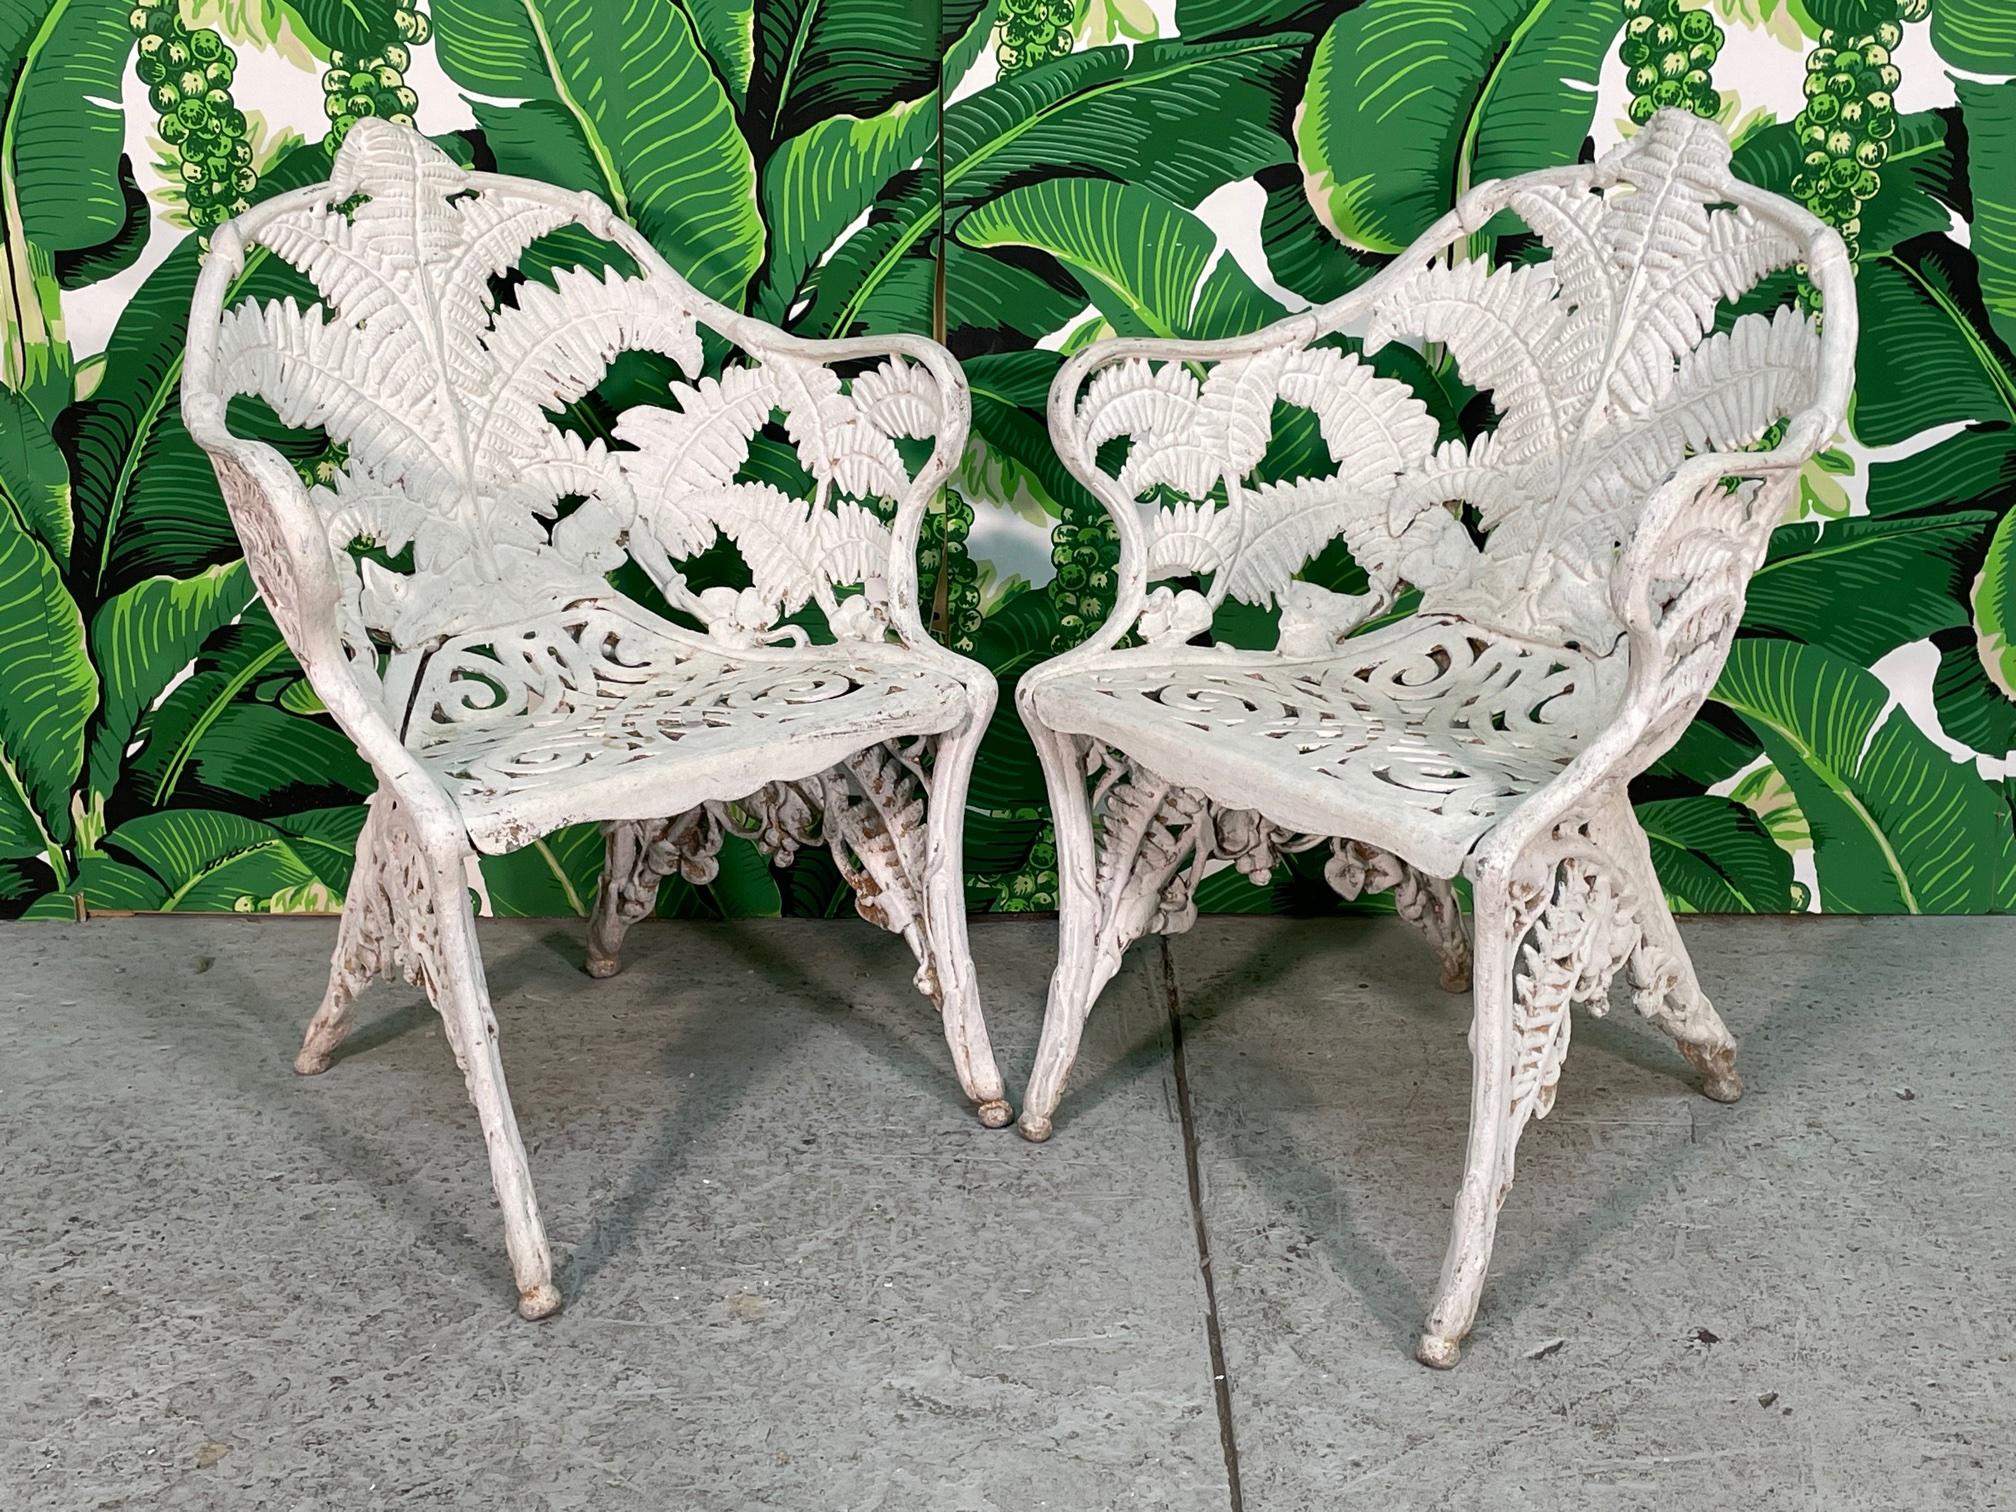 Pair of heavy cast iron patio chairs in a open form with fern leaf design. Could be cast aluminum, but each weighs over 50 pounds. Good vintage condition with typical wear consistent with age (see photos). Seat height is 16,5